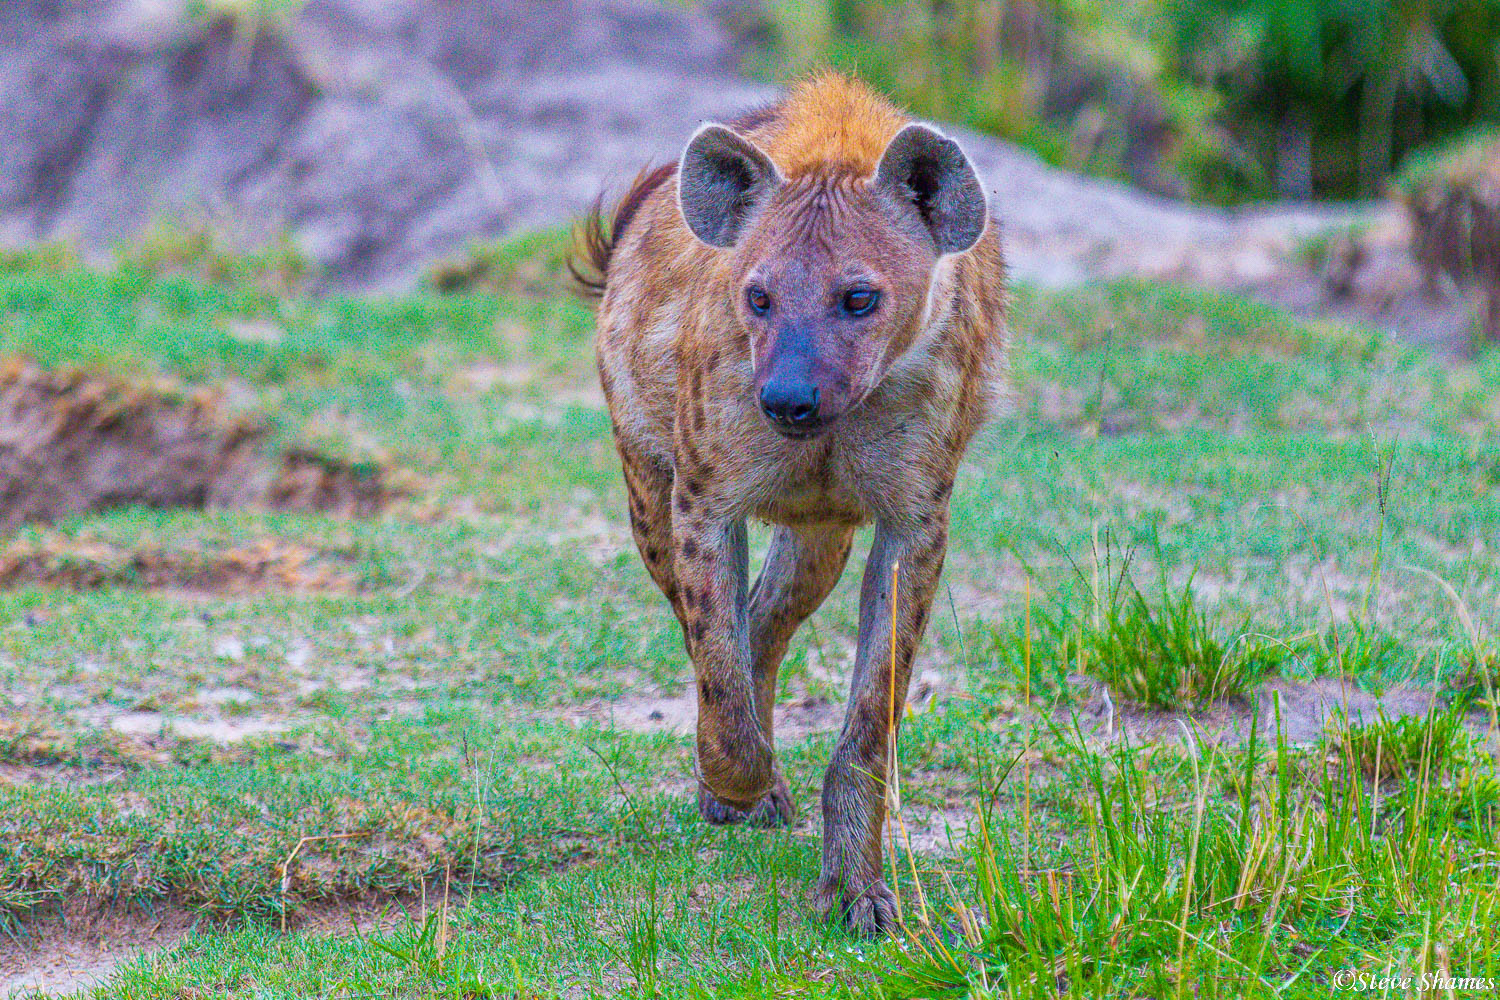 Spotted hyena out for a stroll in the early morning.